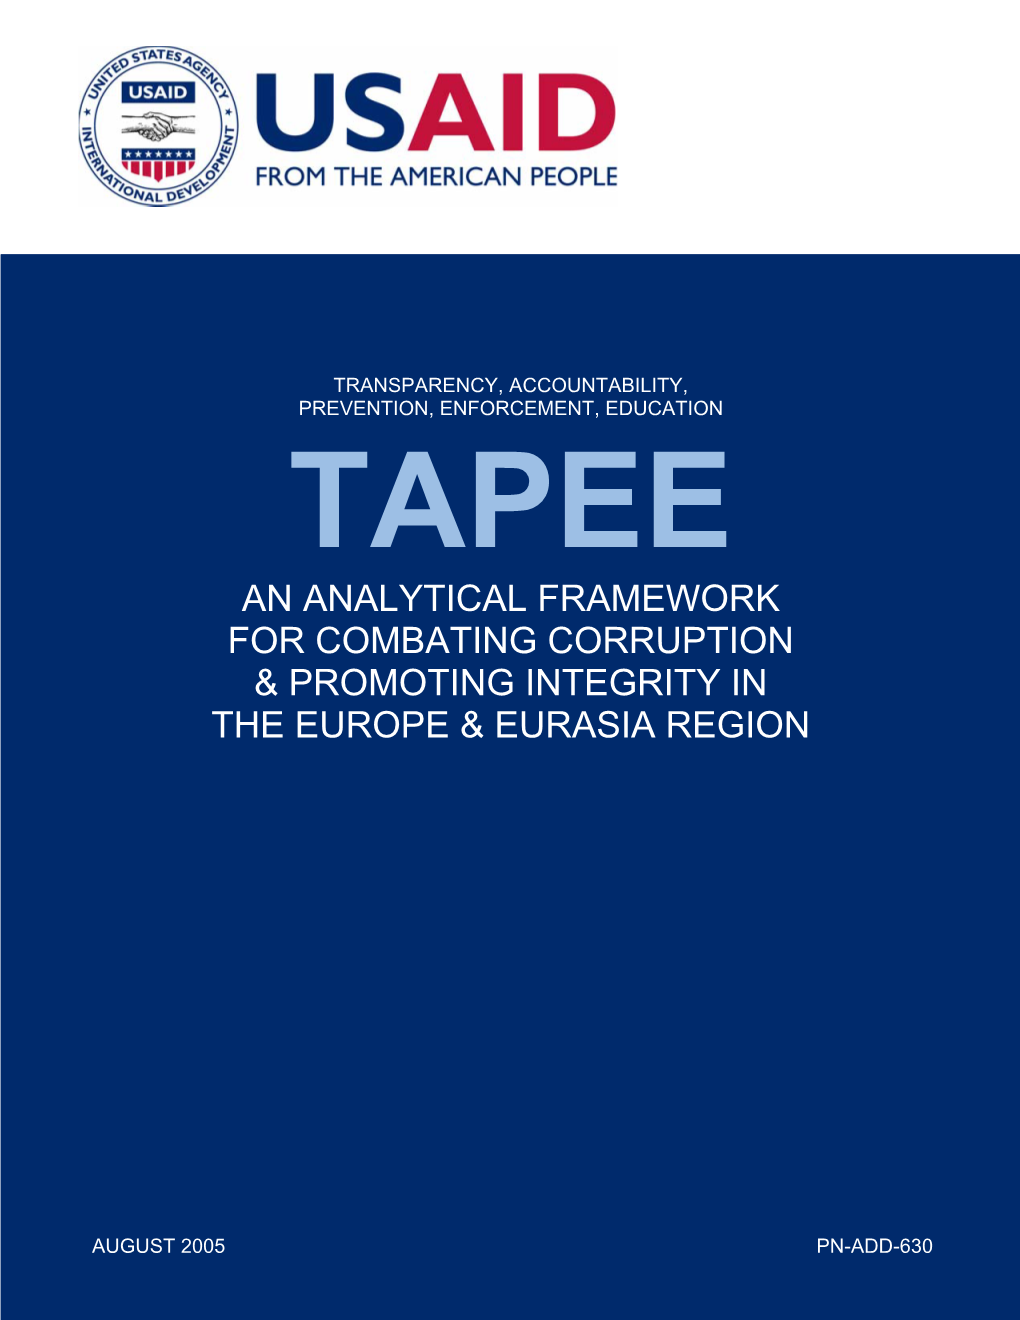 Tapee an Analytical Framework for Combating Corruption & Promoting Integrity in the Europe & Eurasia Region